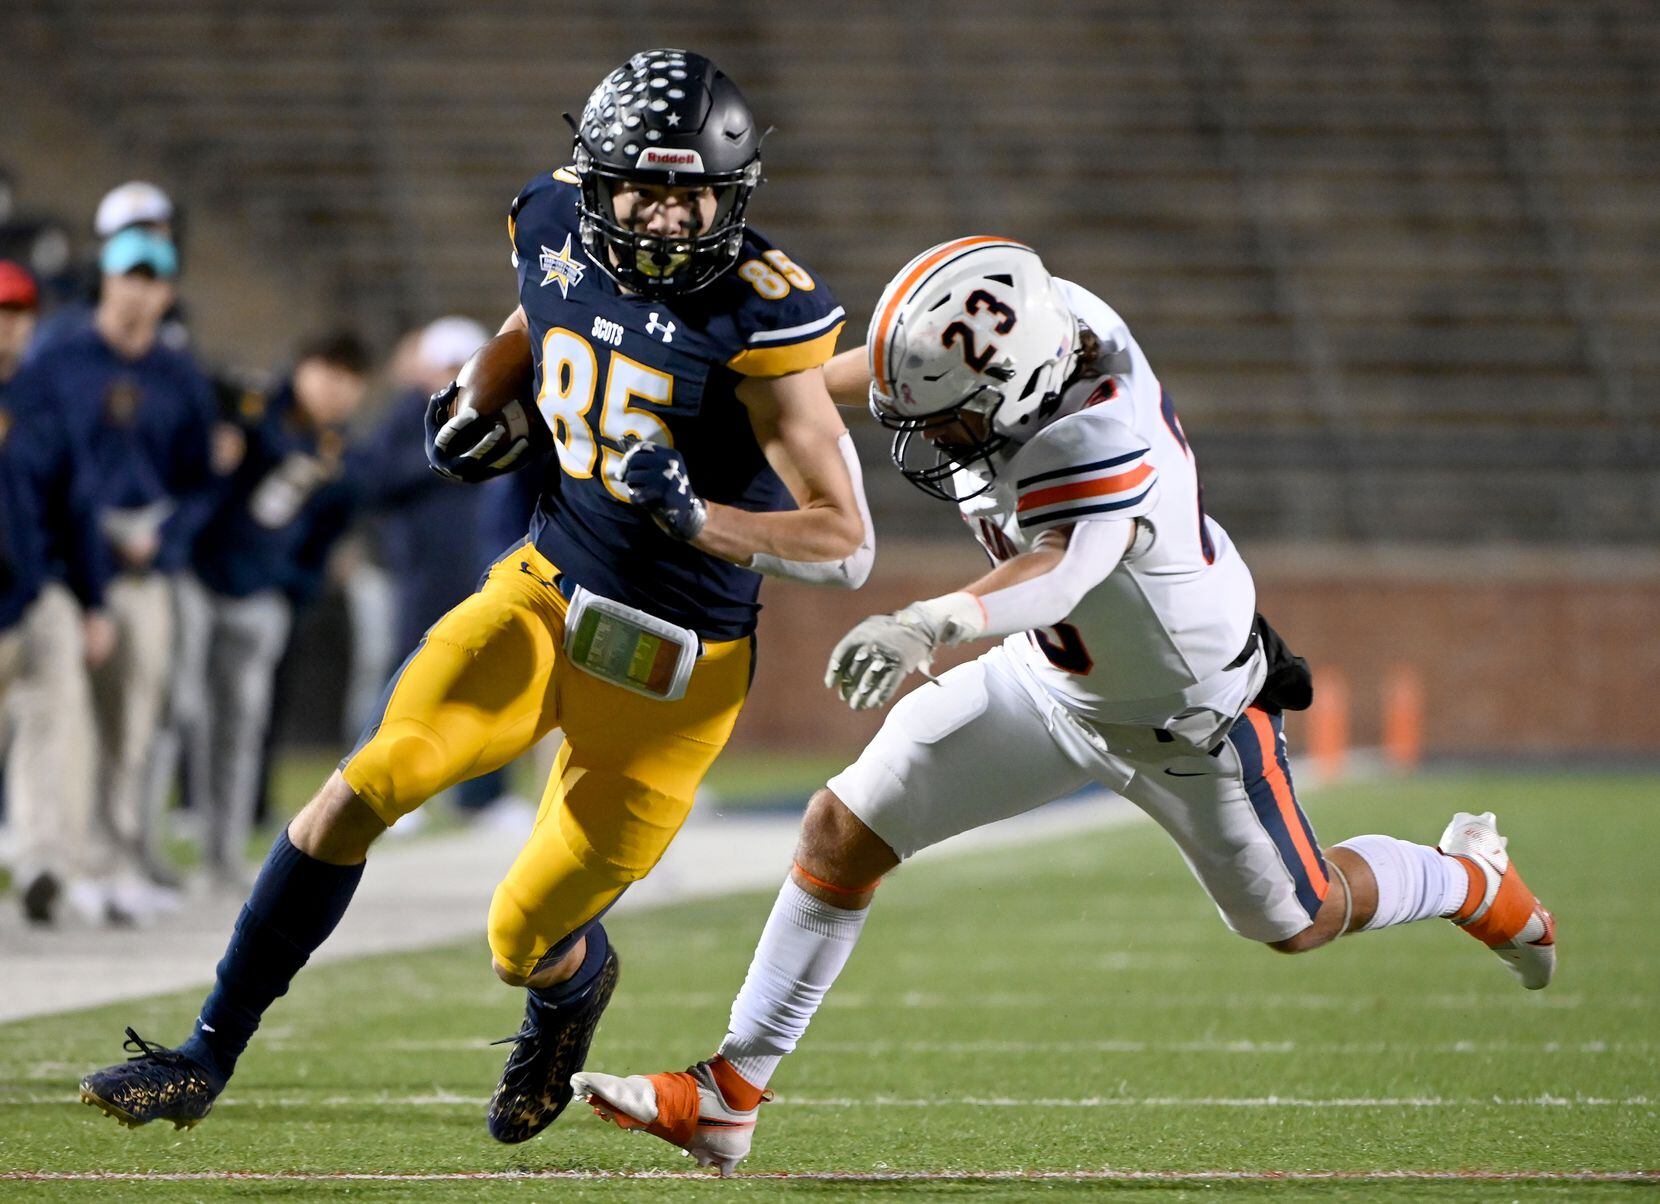 Highland Park’s Jackson Heis (85) tries to run through a tackle attempt by Wakeland's...